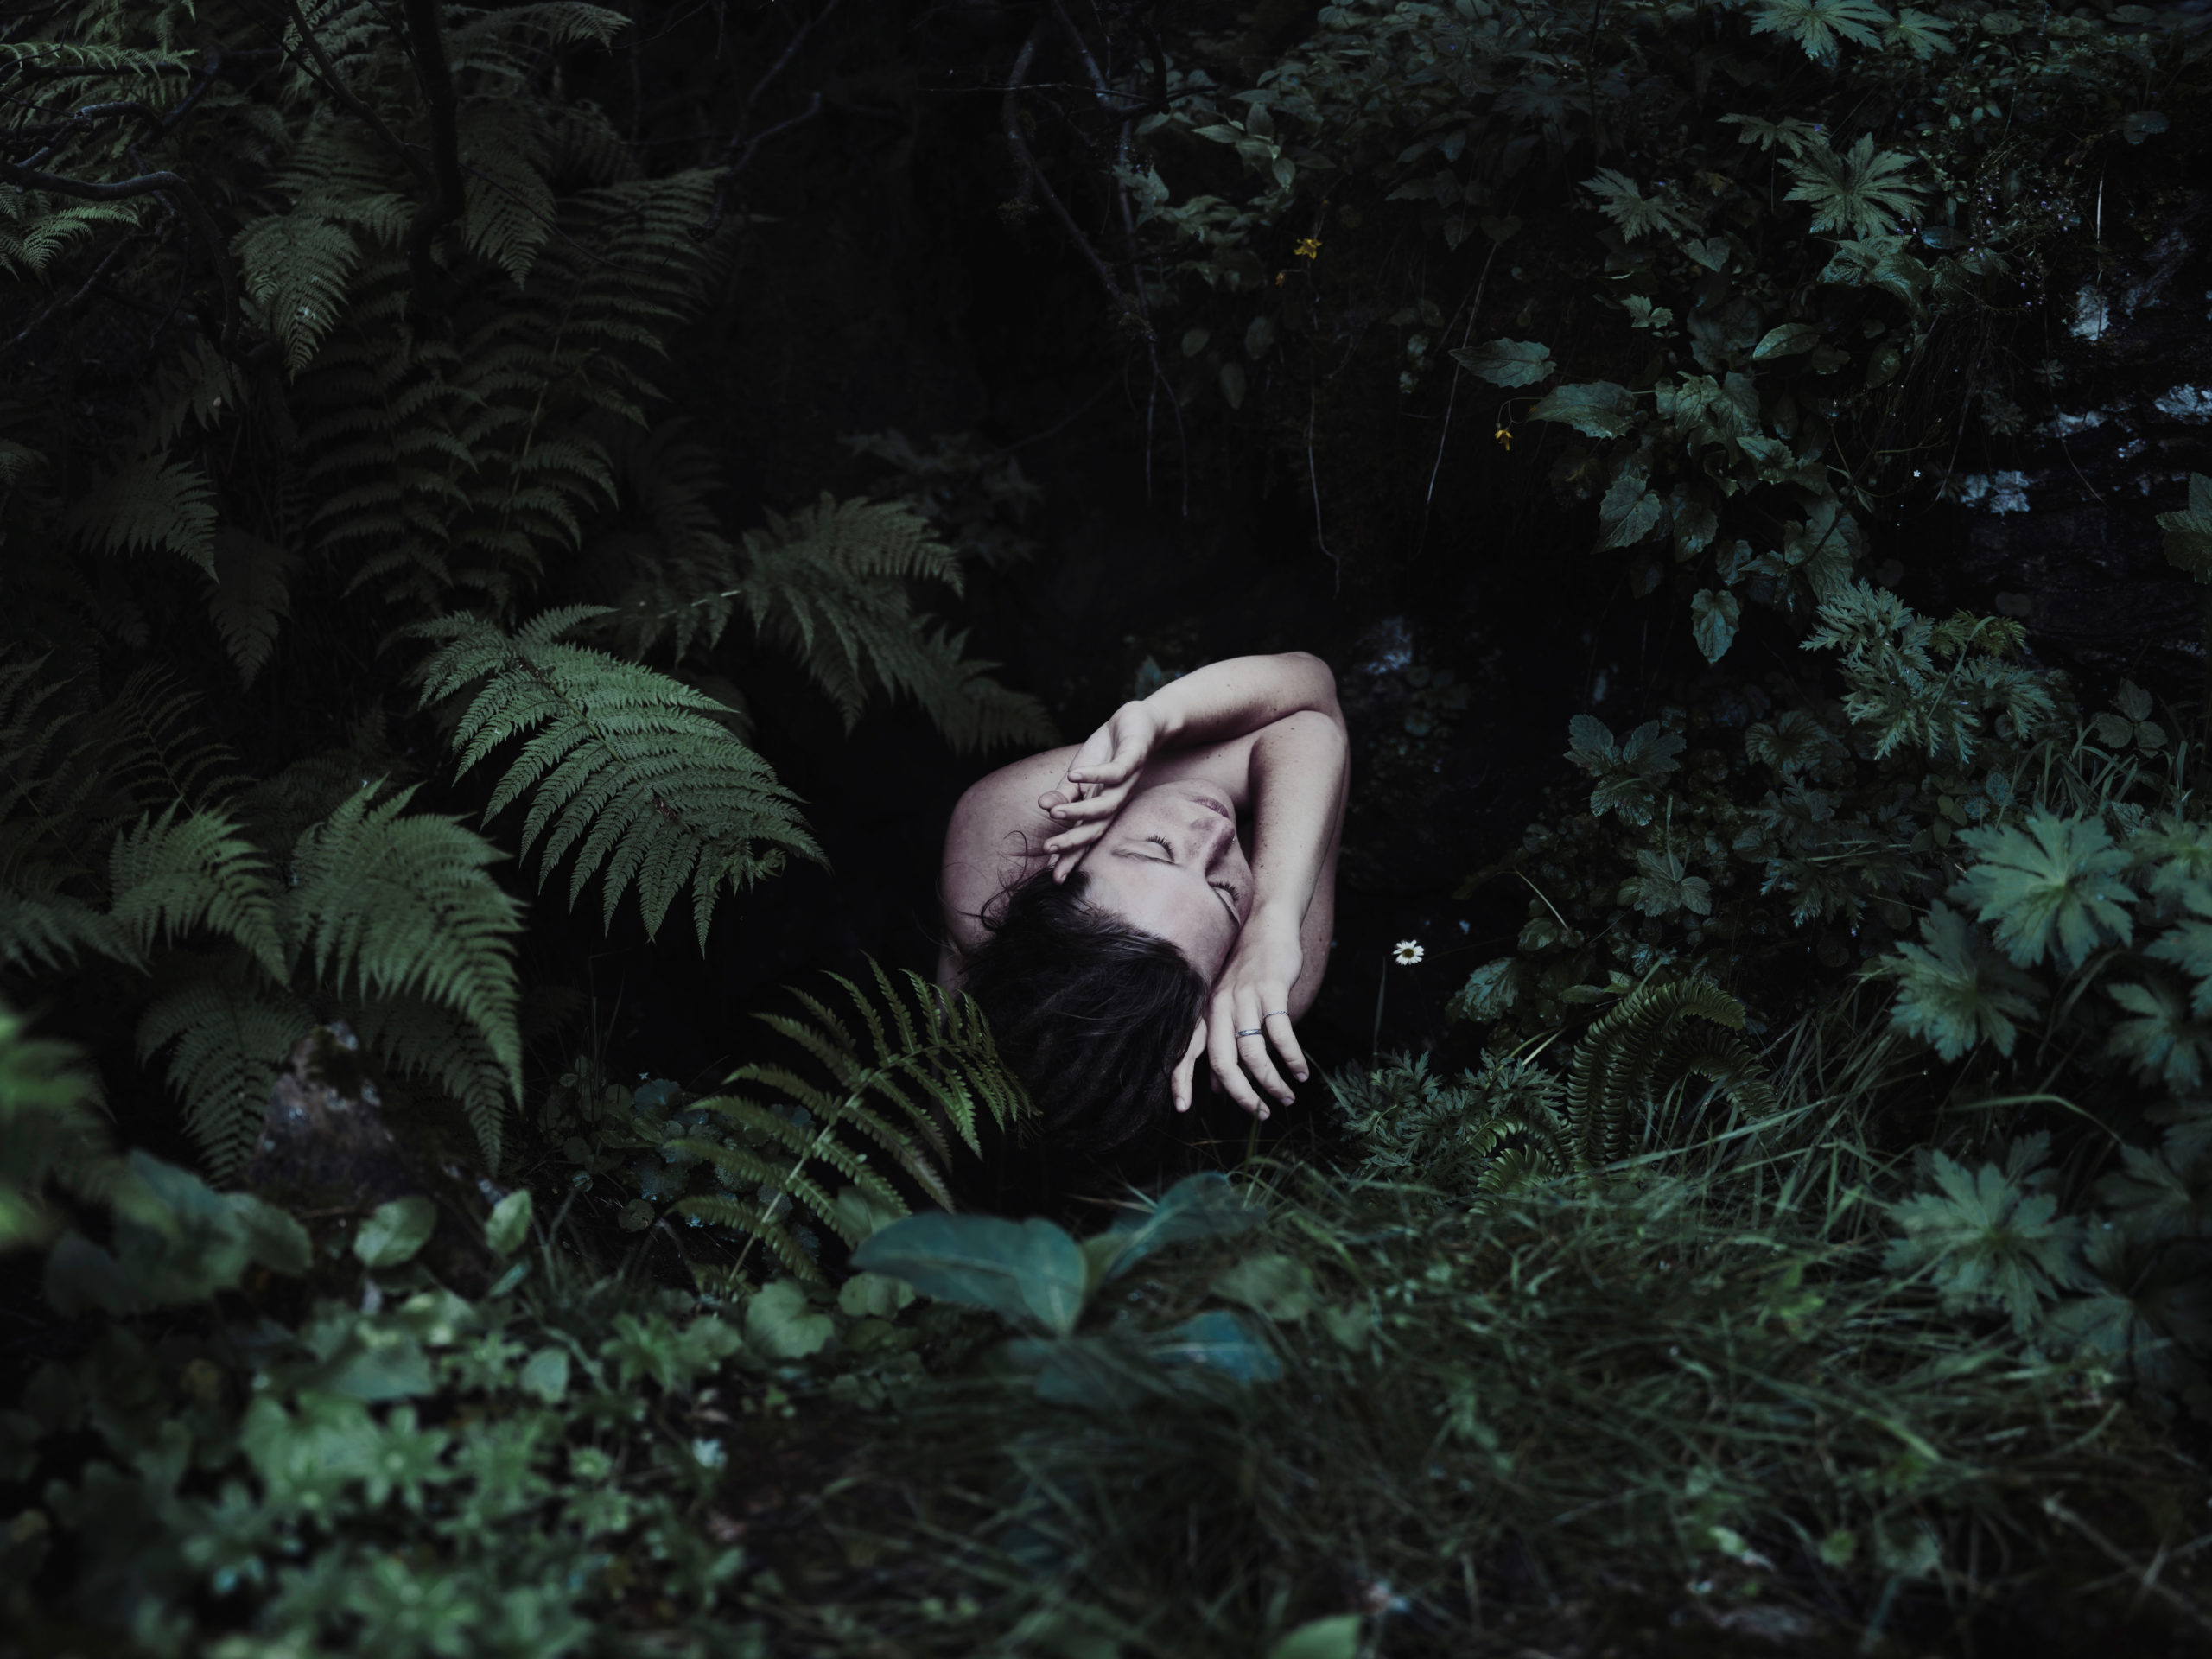 Sensual self portrait photograph showing a woman surrounded by forest plants.